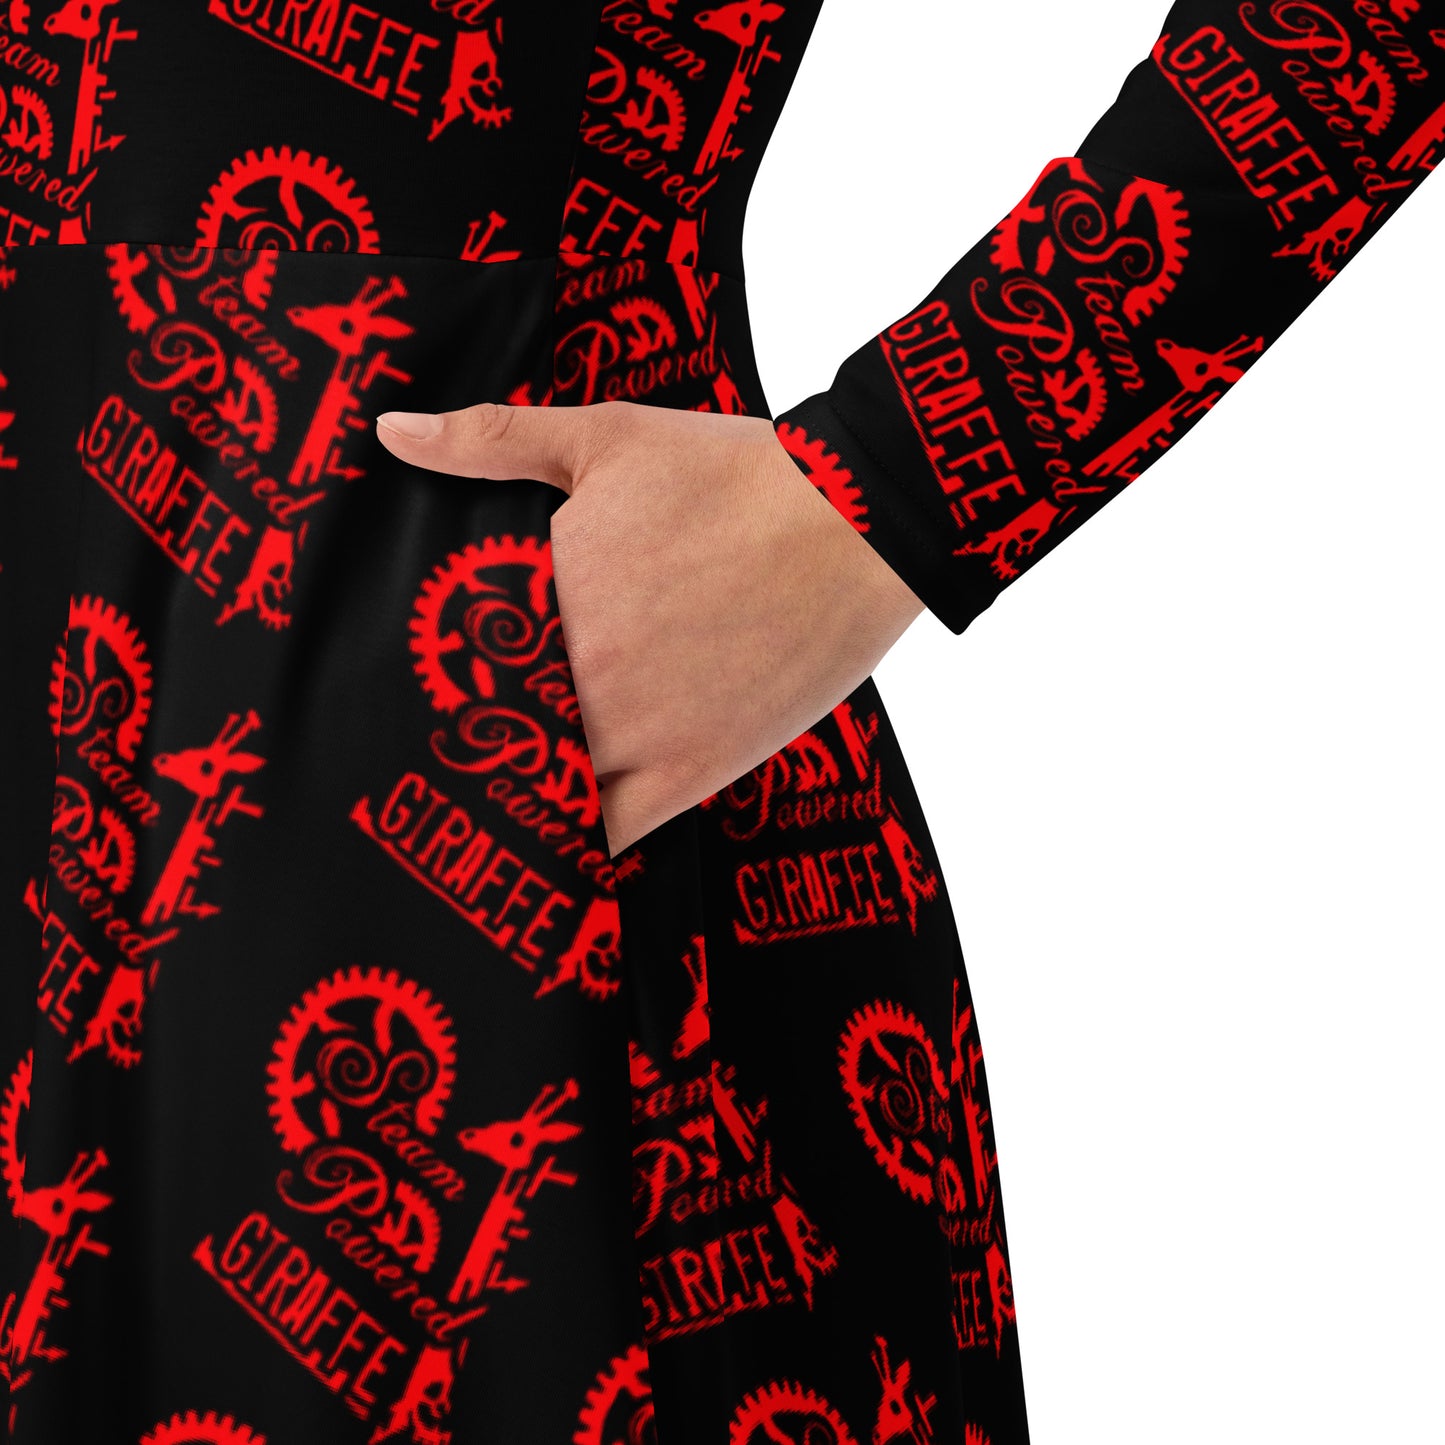 Black with Red SPG Logo Long Sleeve Dress